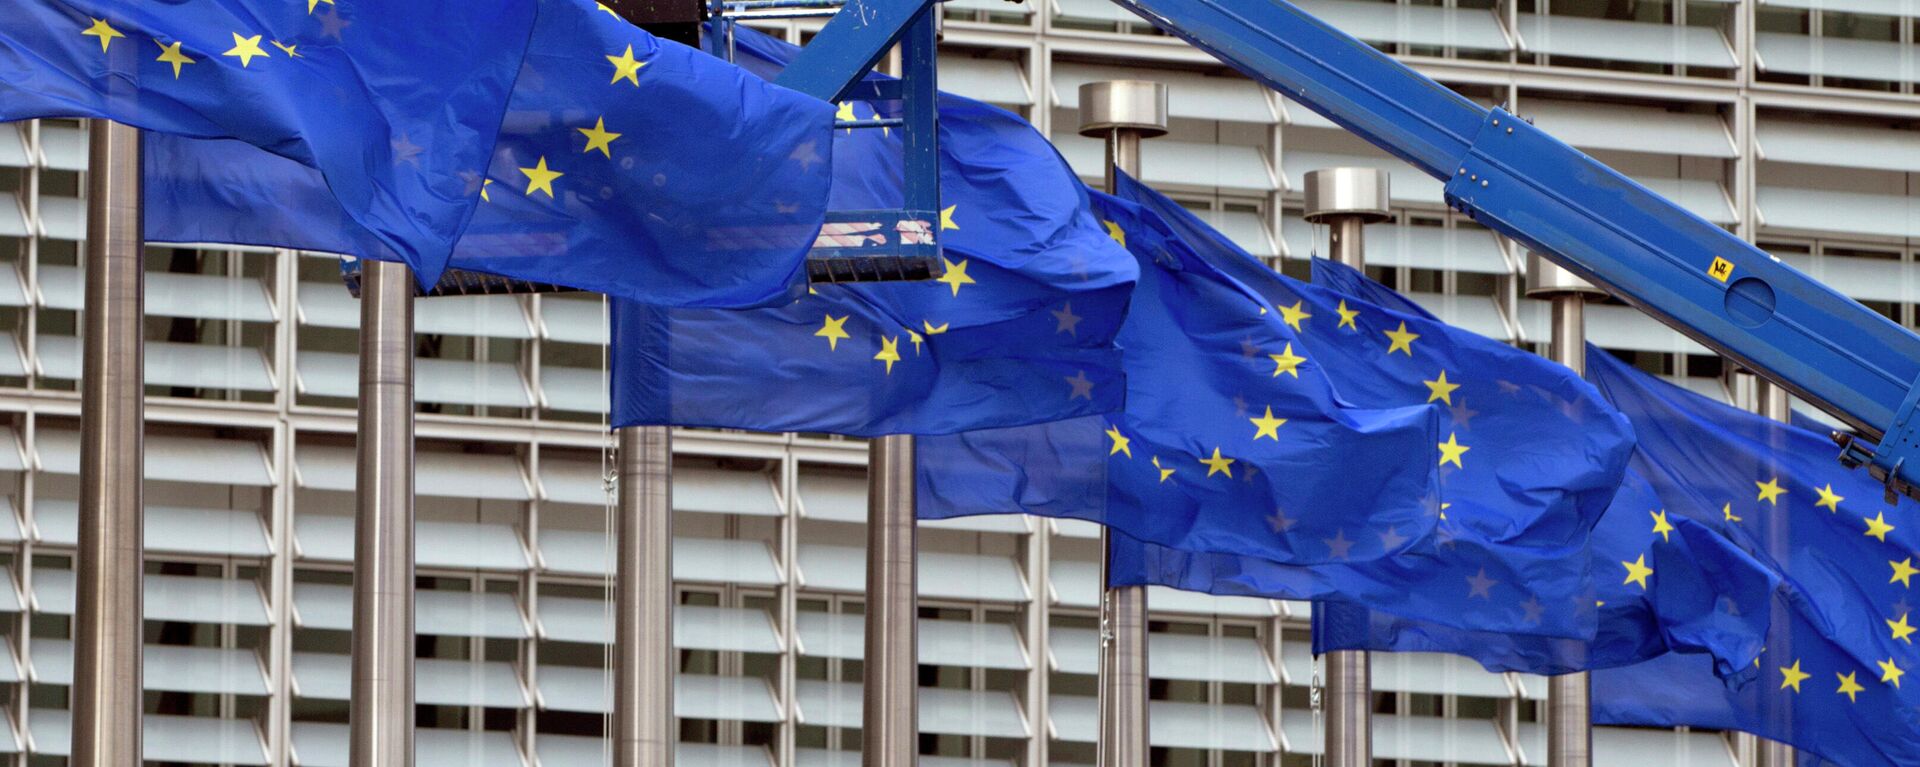 In this June 23, 2016 file photo, a worker on a lift adjusts the EU flags in front of EU headquarters in Brussels. - Sputnik International, 1920, 05.09.2022